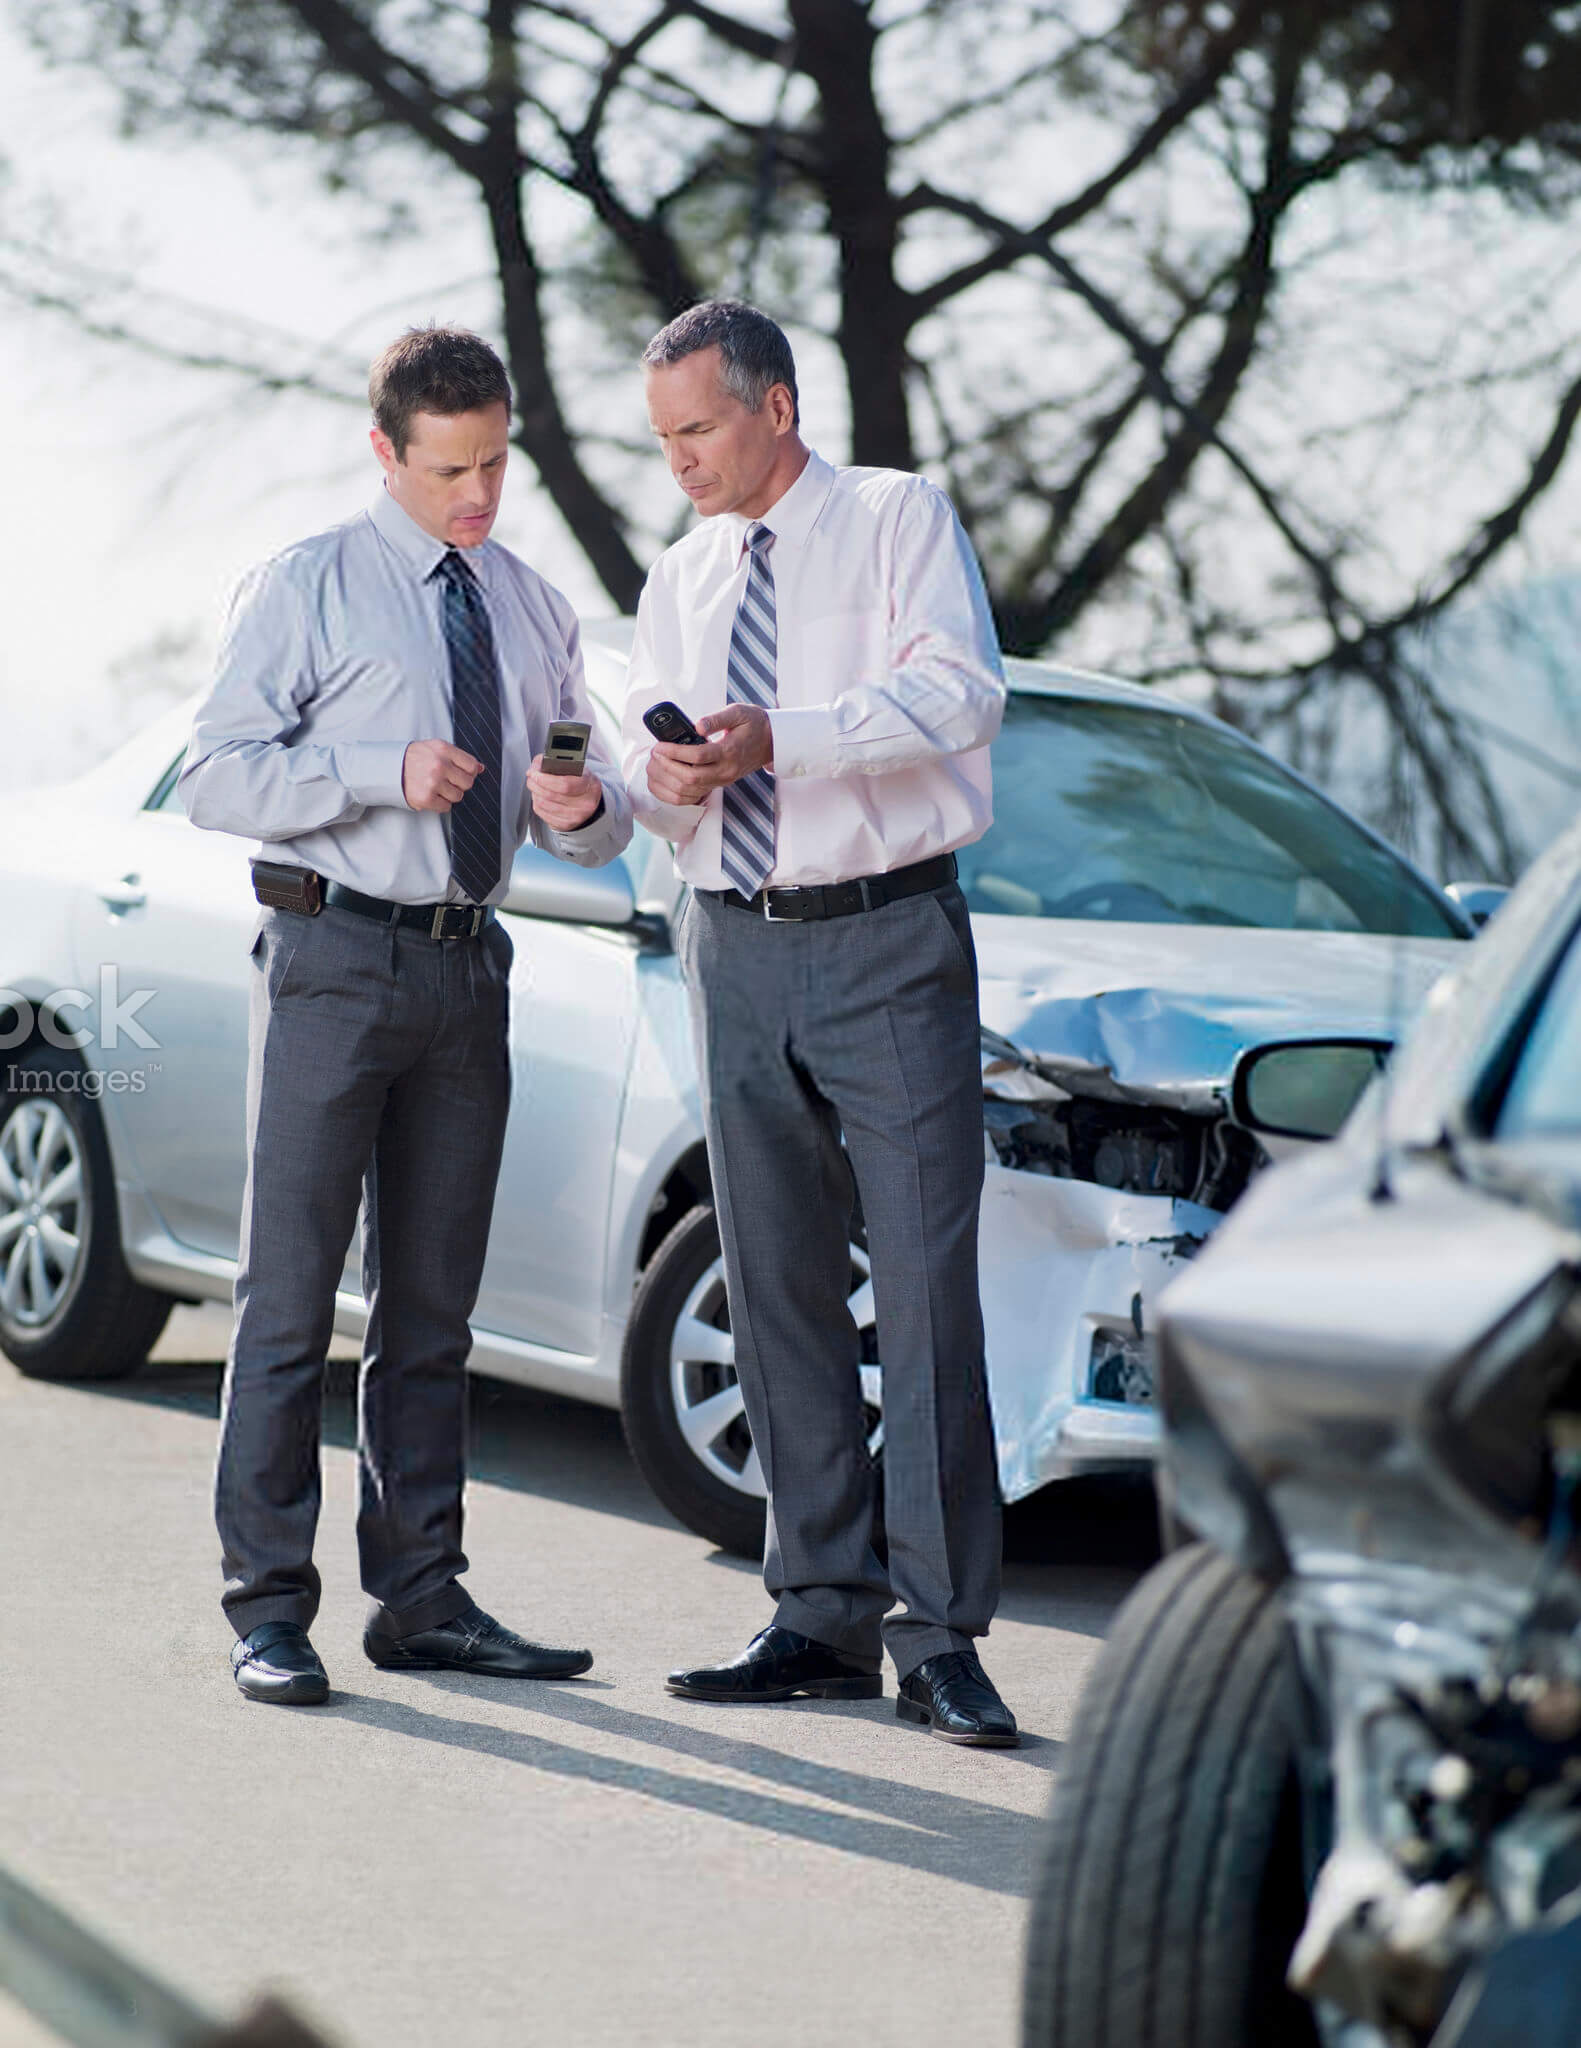 How to find local accident report